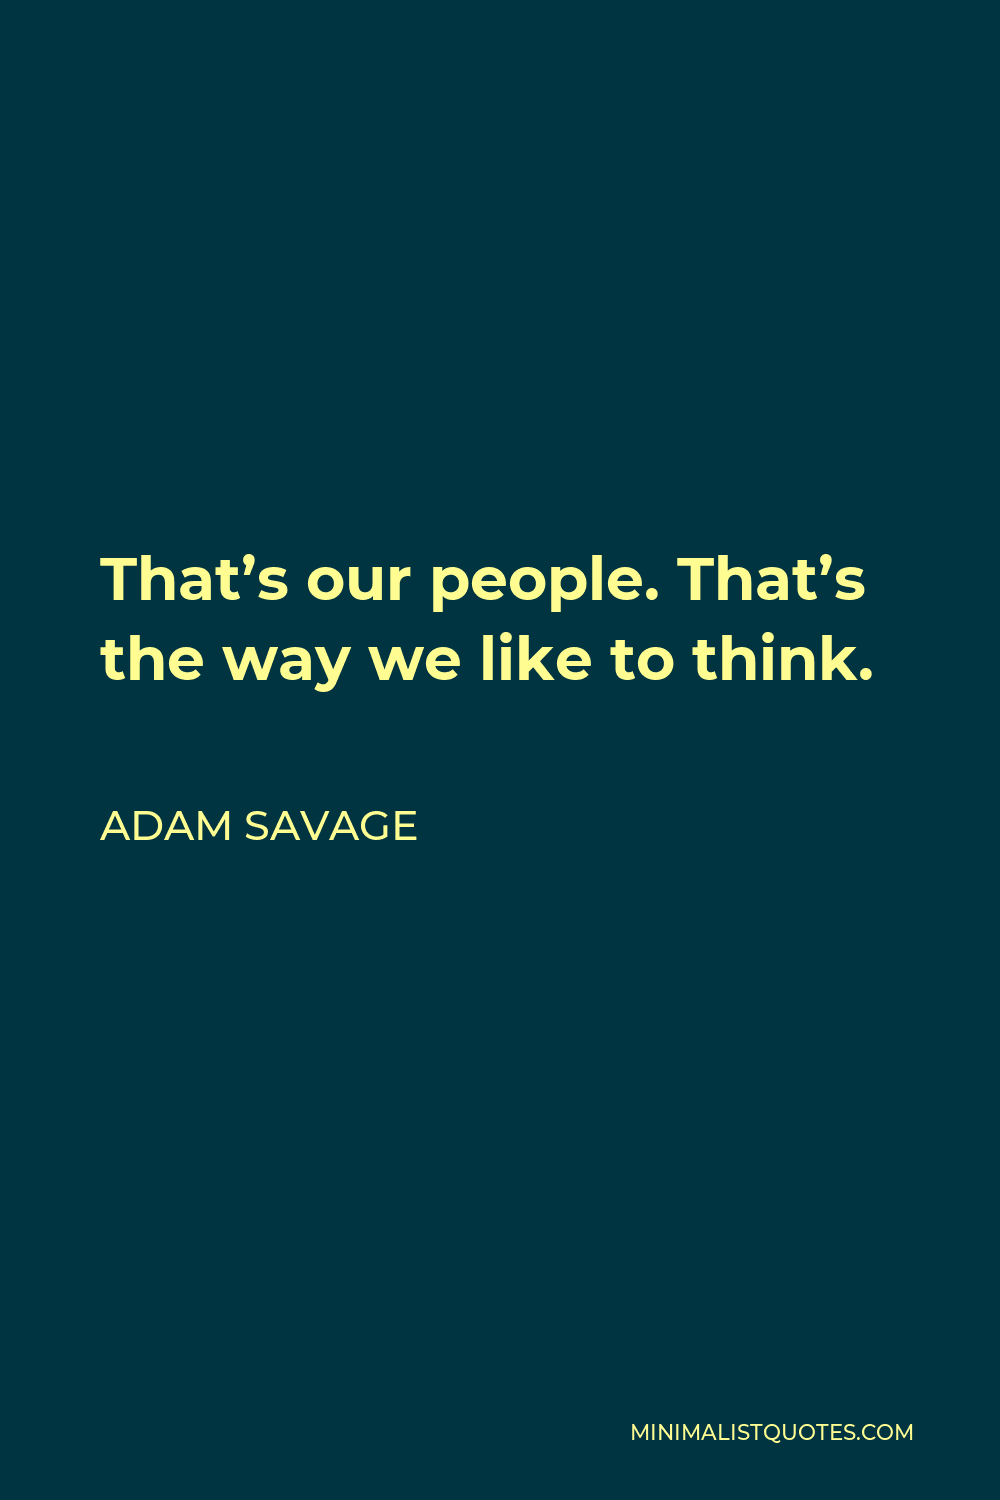 Adam Savage Quote: “I think LEGOs are one of the best toys ever developed.”